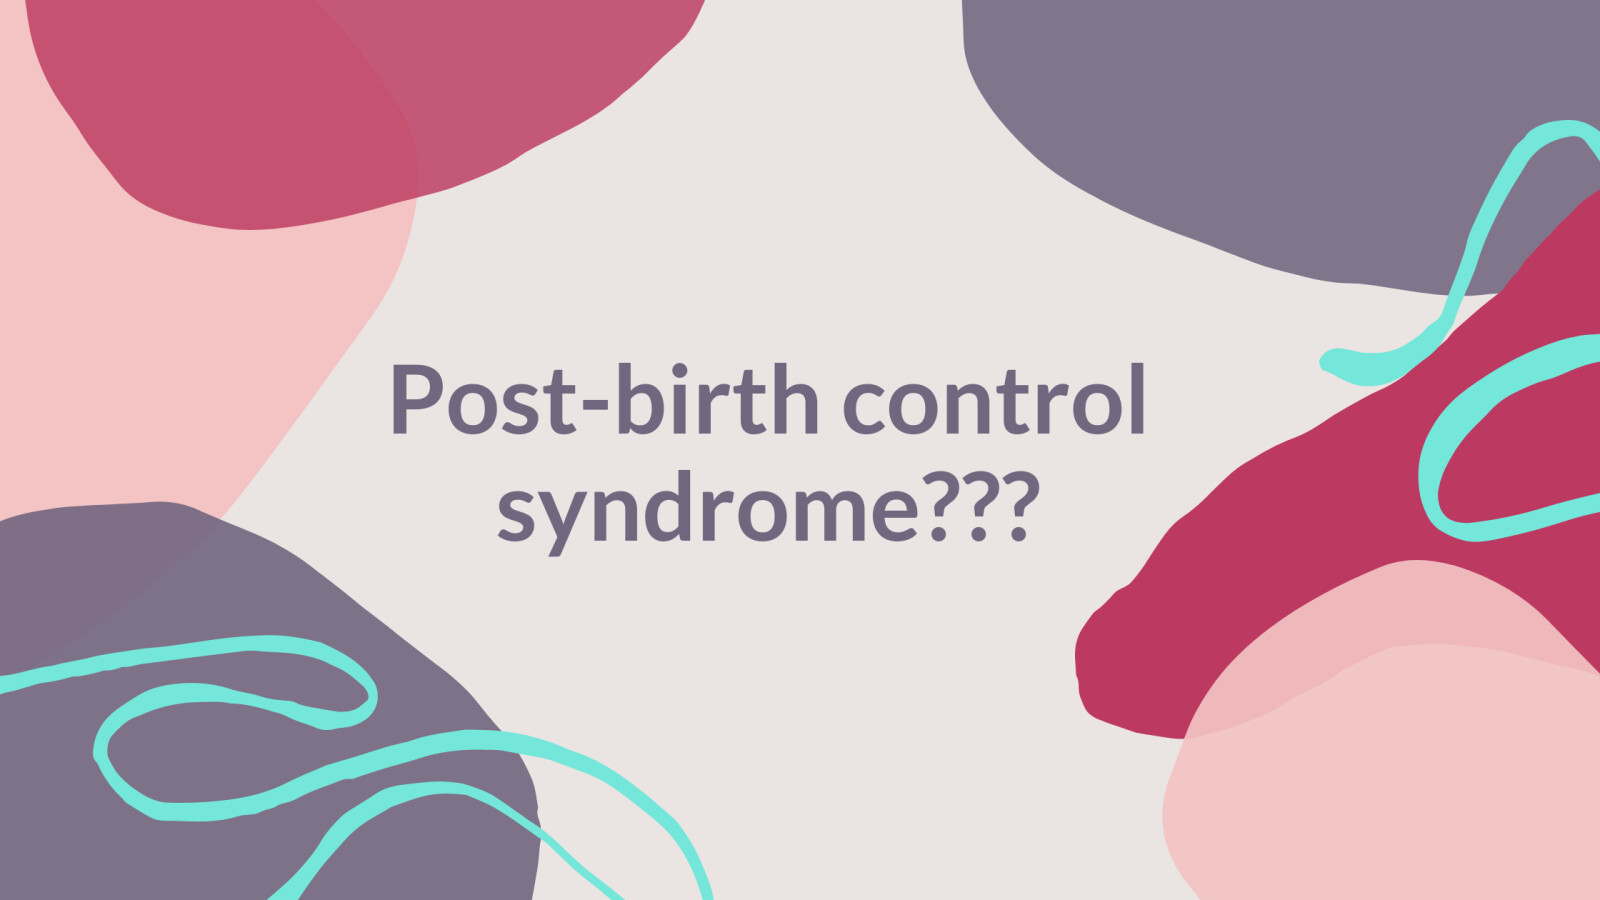  So What Exactly is Post Birth Control Syndrome Anyway?!